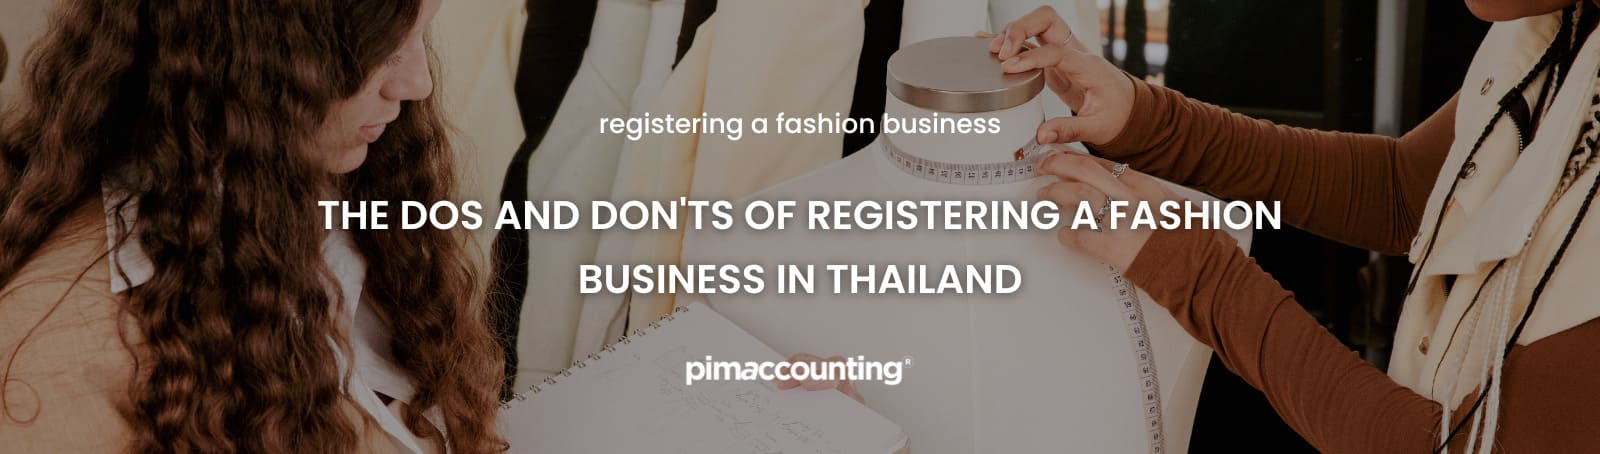 The dos and don'ts of registering a fashion business in Thailand